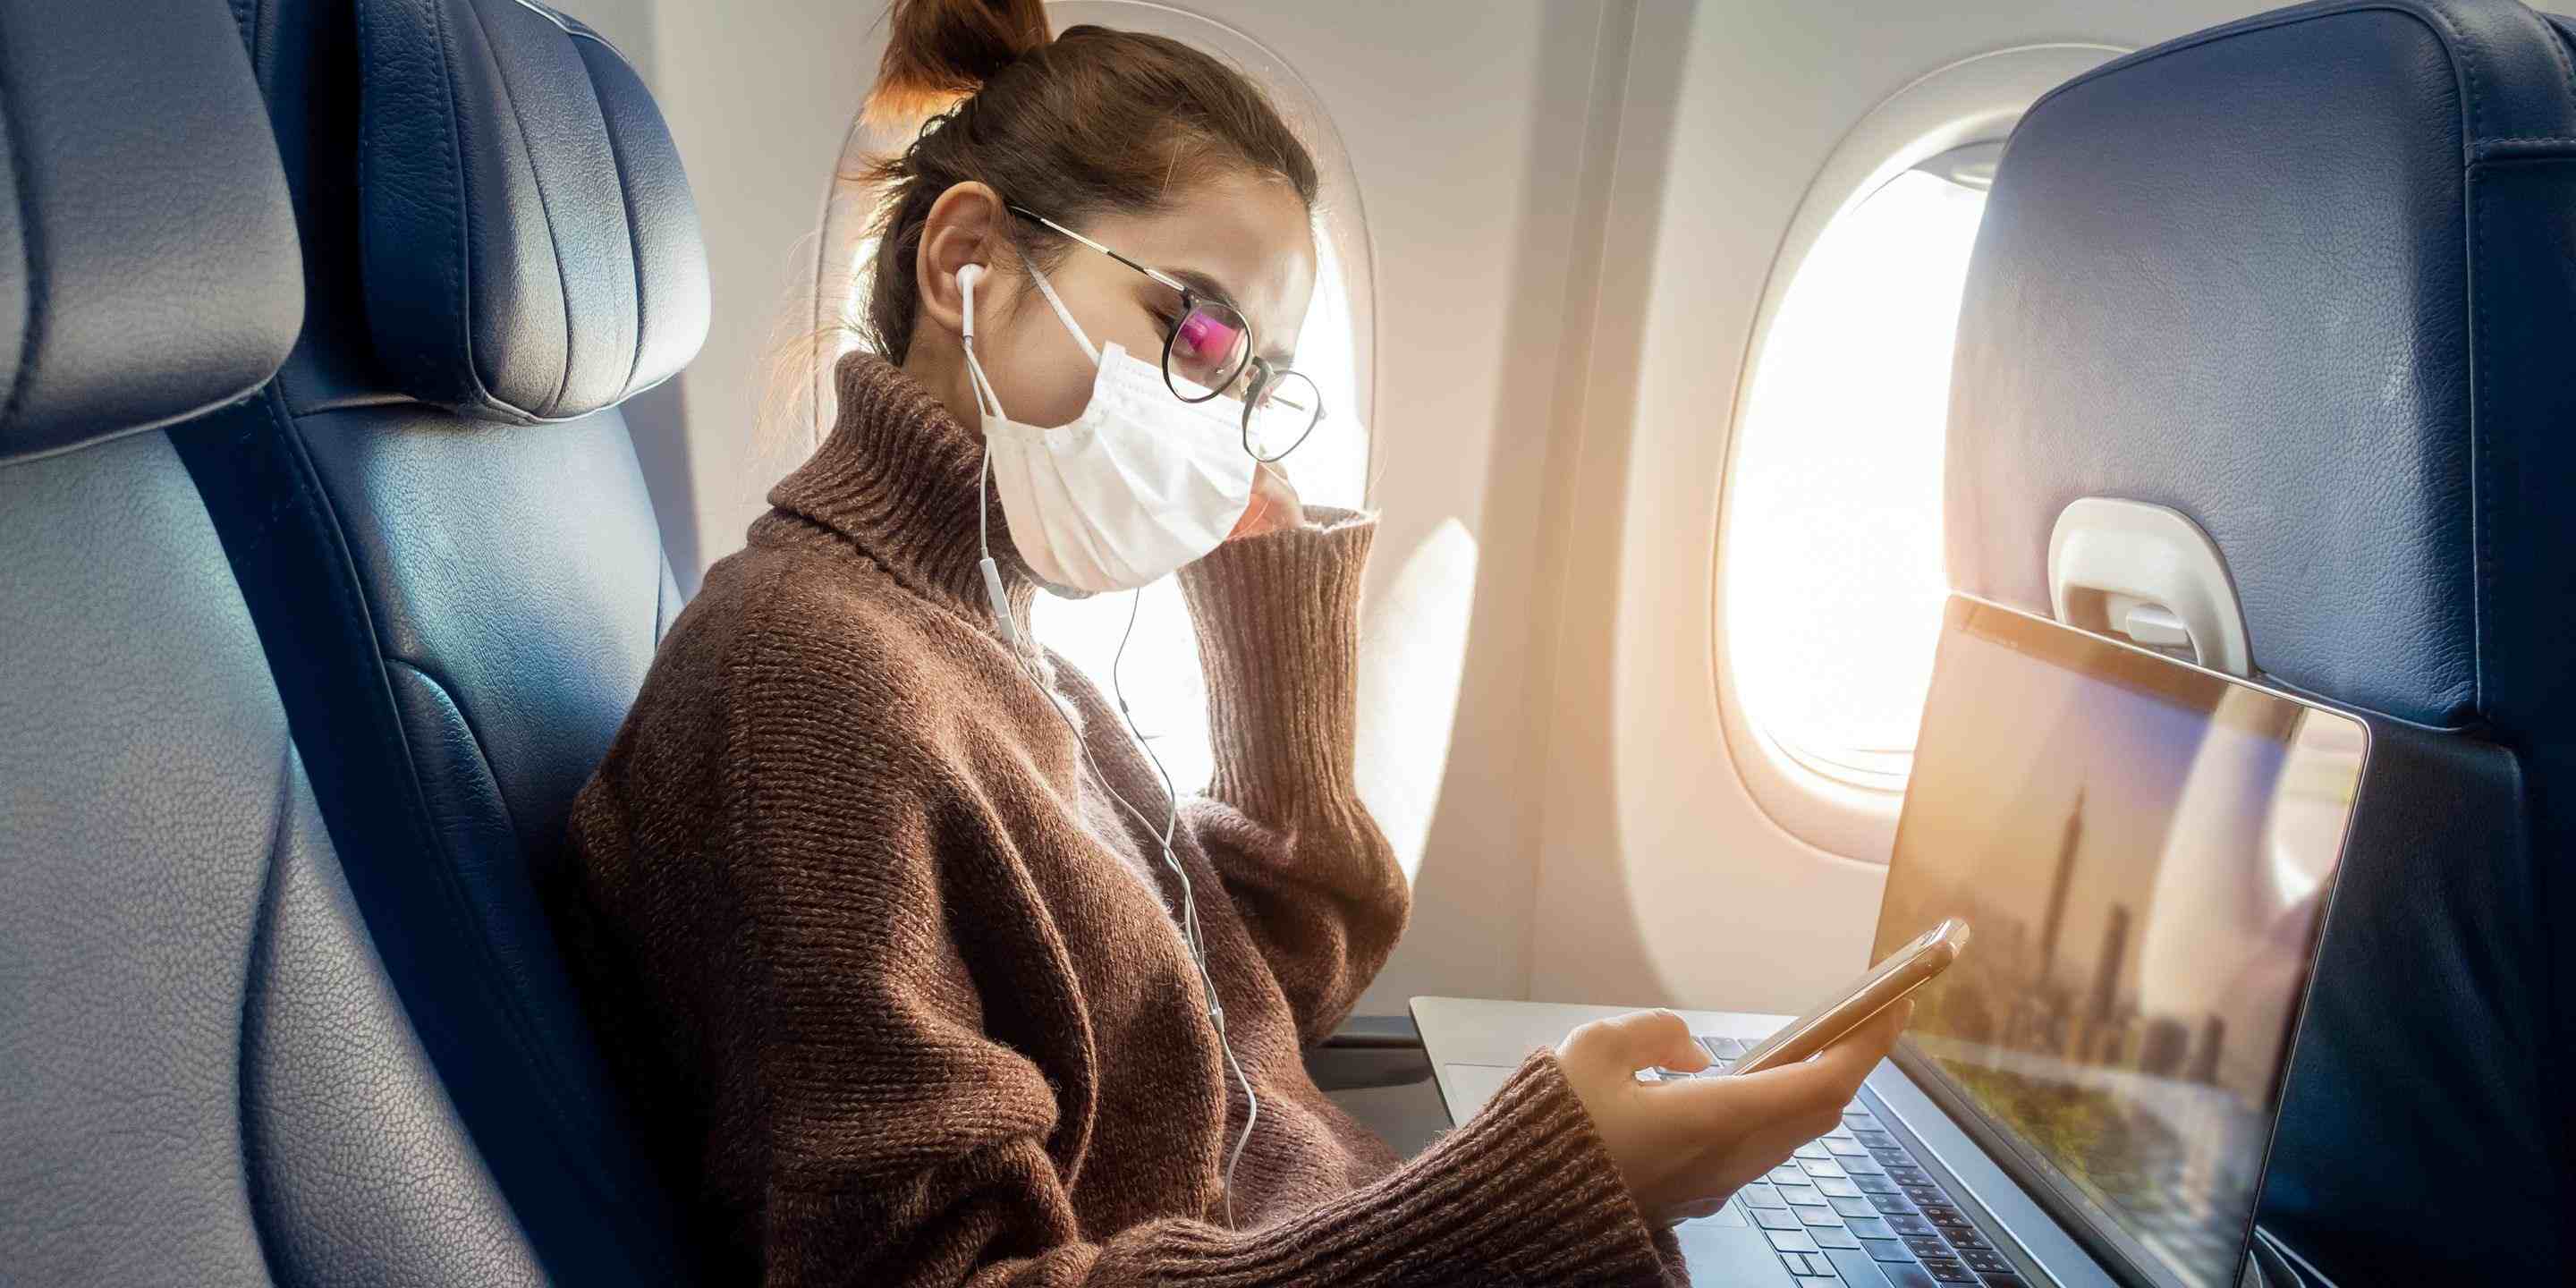 in-flight-wi-fi-is-getting-more-common-but-you-still-need-to-be-cautious